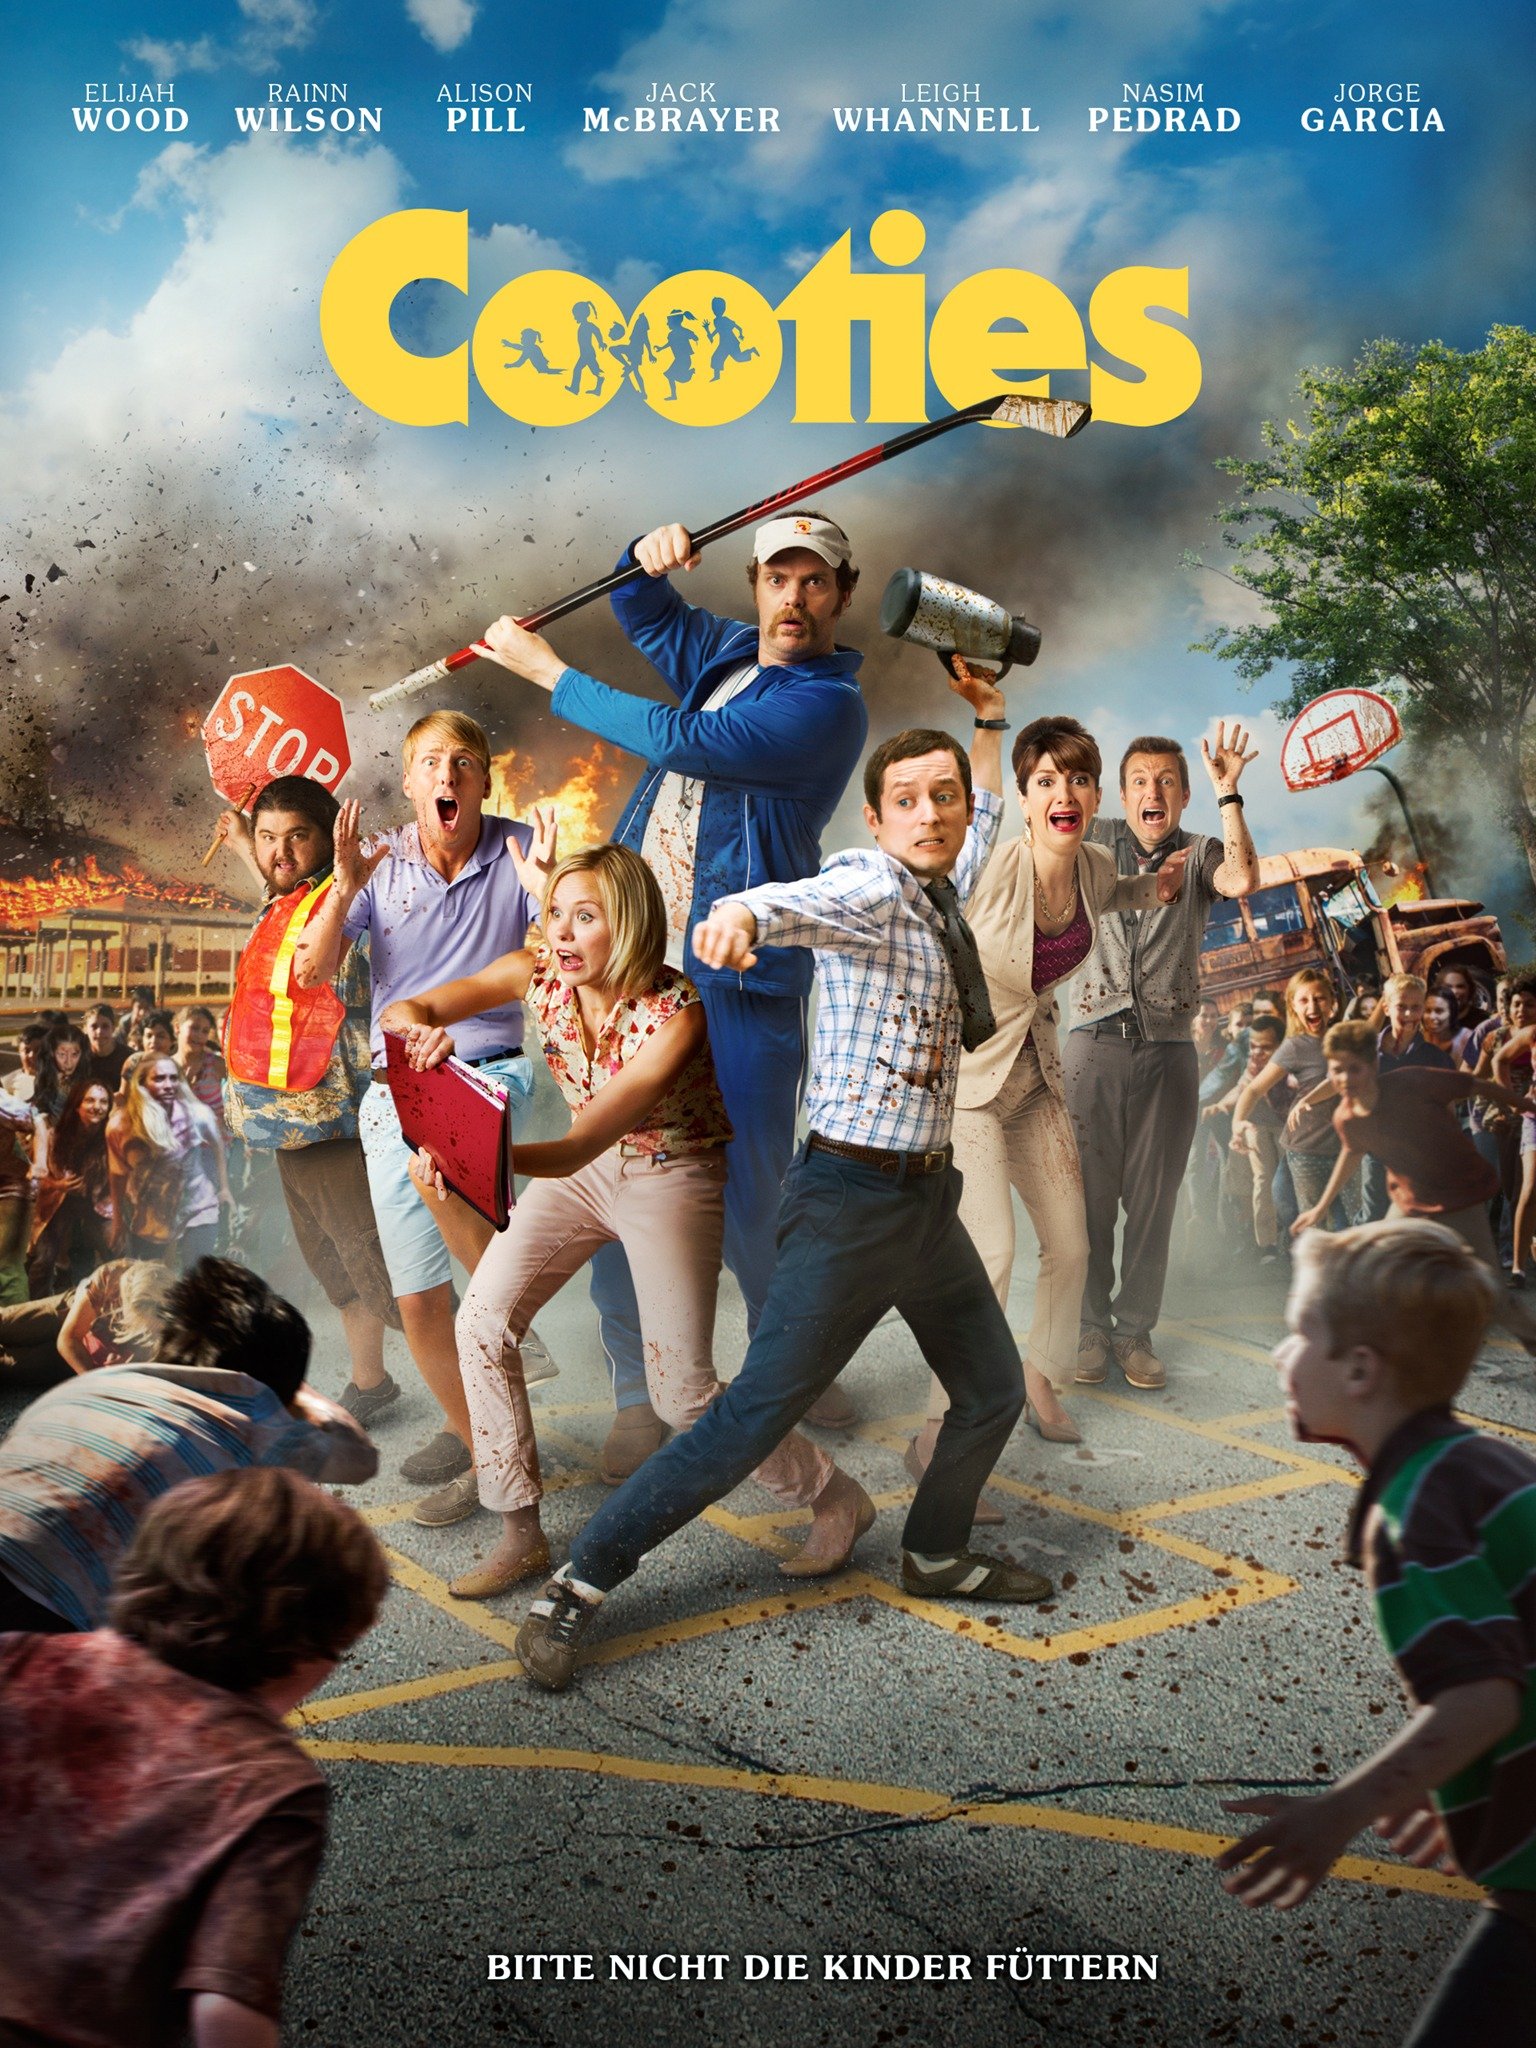 Cooties (2014) - Rotten Tomatoes